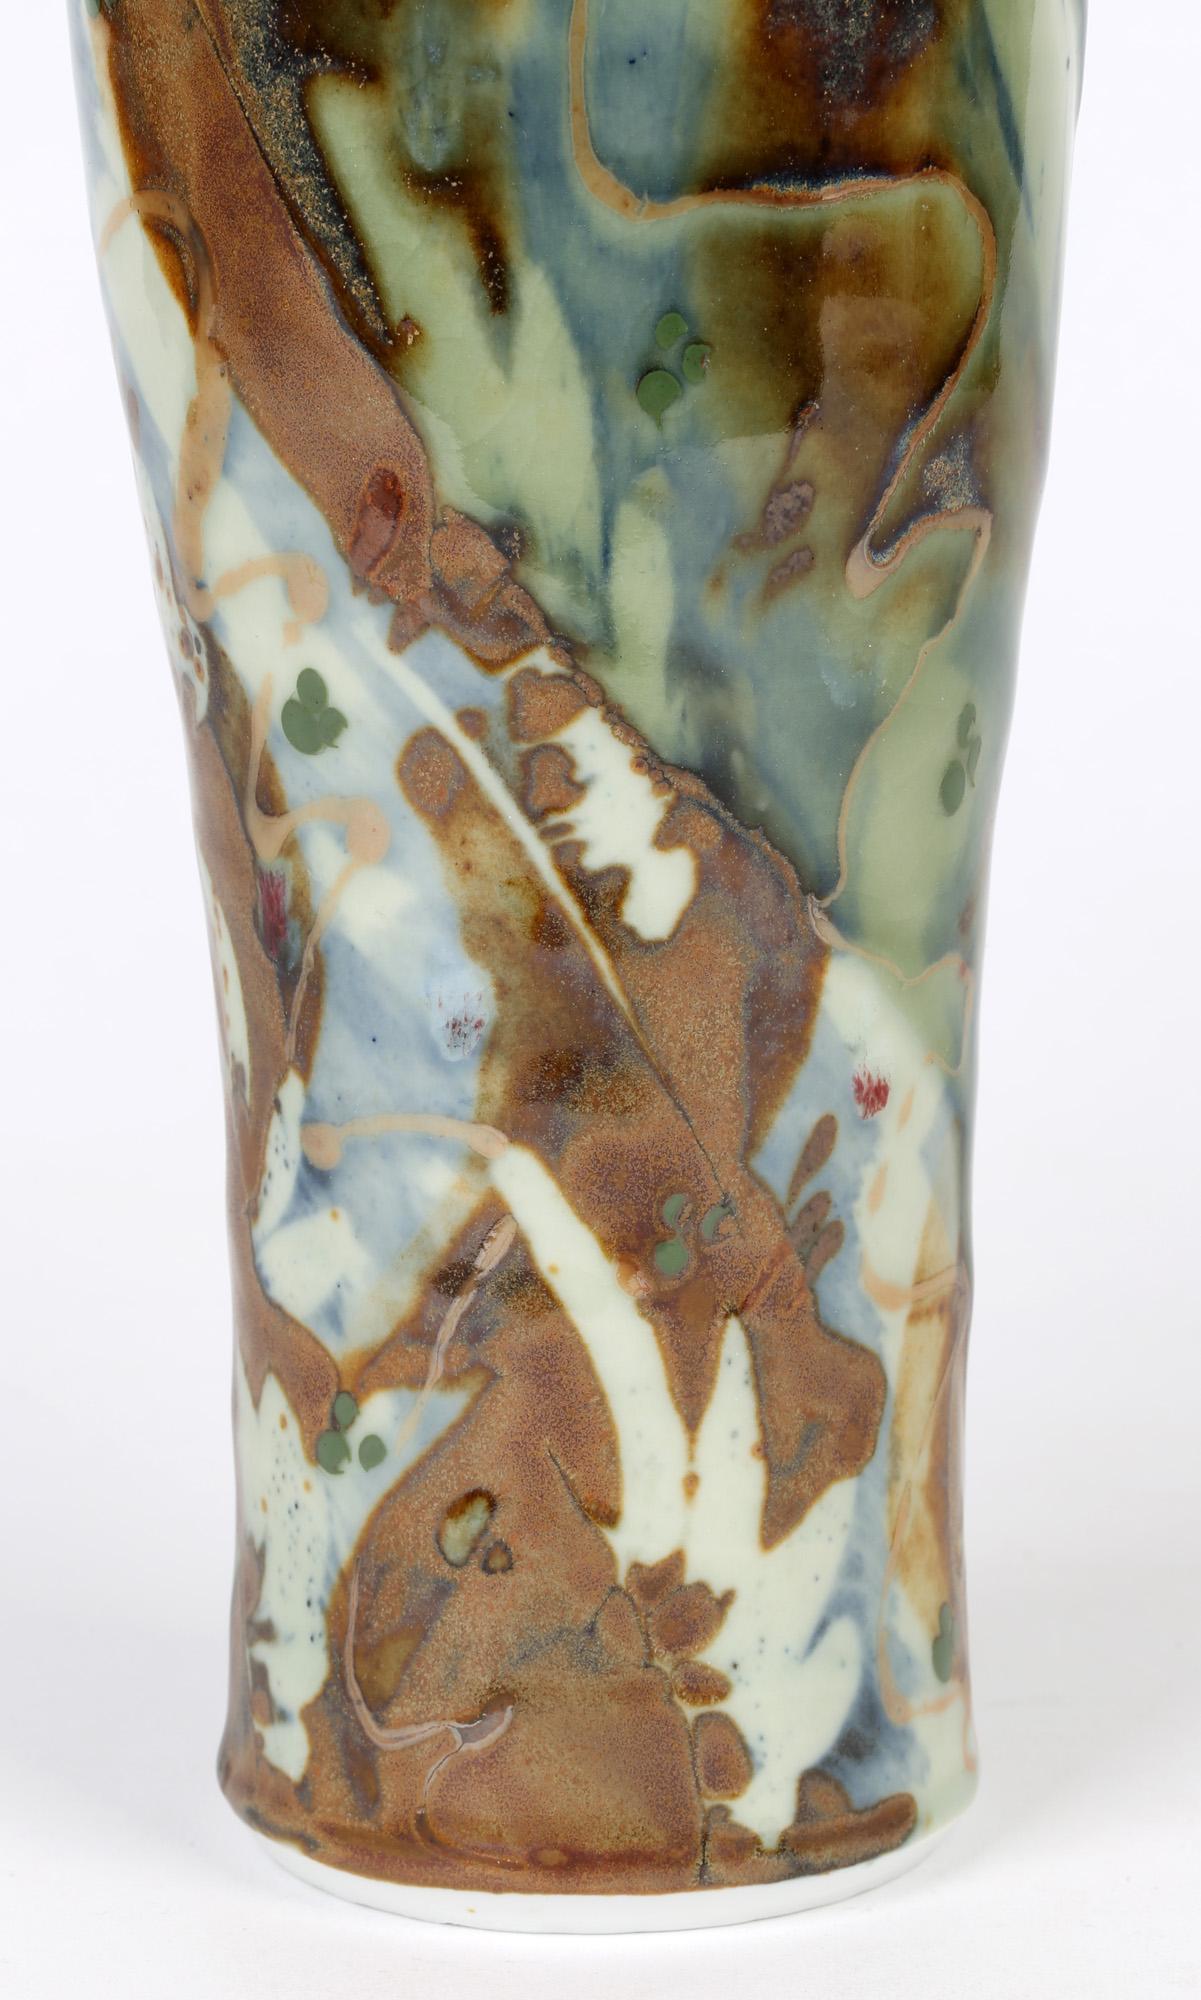 A tall and striking studio pottery porcelain vase decorated in abstract colored glazes on a celadon ground attributed to Derek Clarkson and dating from the 20th century. The vase formed part of a Derek Clarkson collection of studio pottery recently